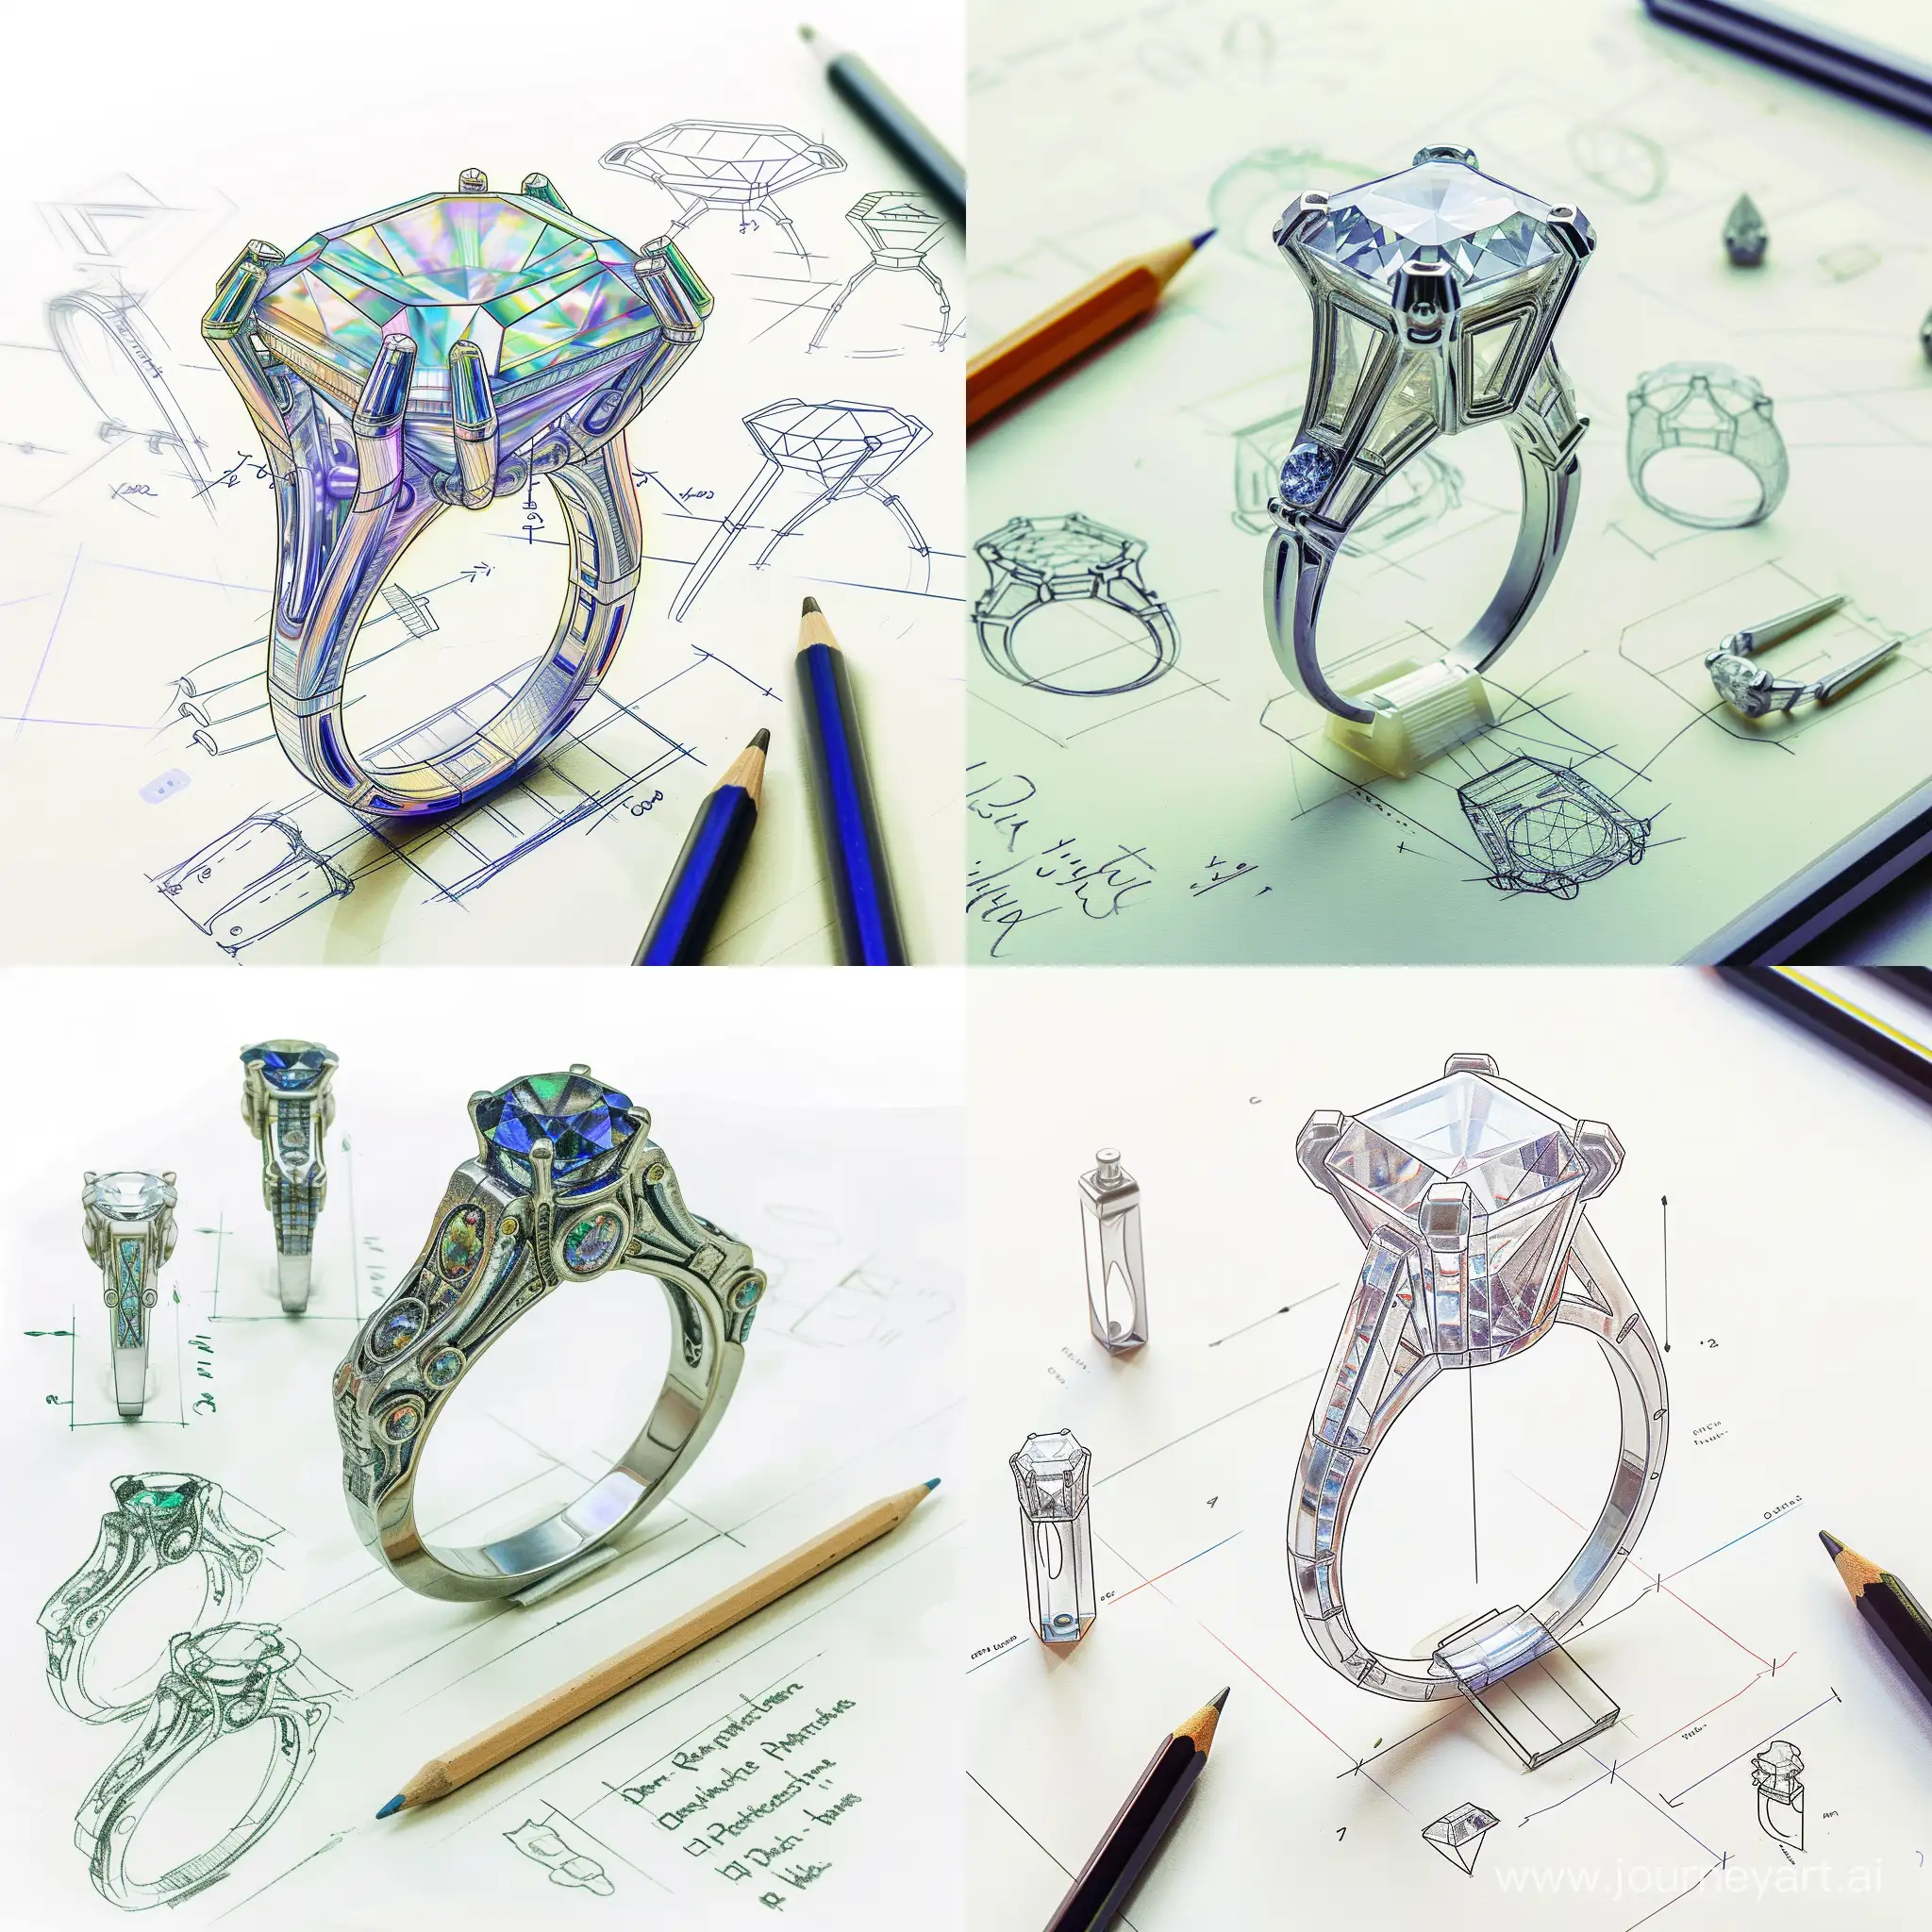 a ring with gem ,Pencil on art board issketching, multiple angles, style of Mechanism,industrial design, text annotations, structural lines,detailed sketch, letterbox, photoreal details, playfulshapes,Marker Pen Coloring,fulllevel layout reference sheet,modern simple jewelry design